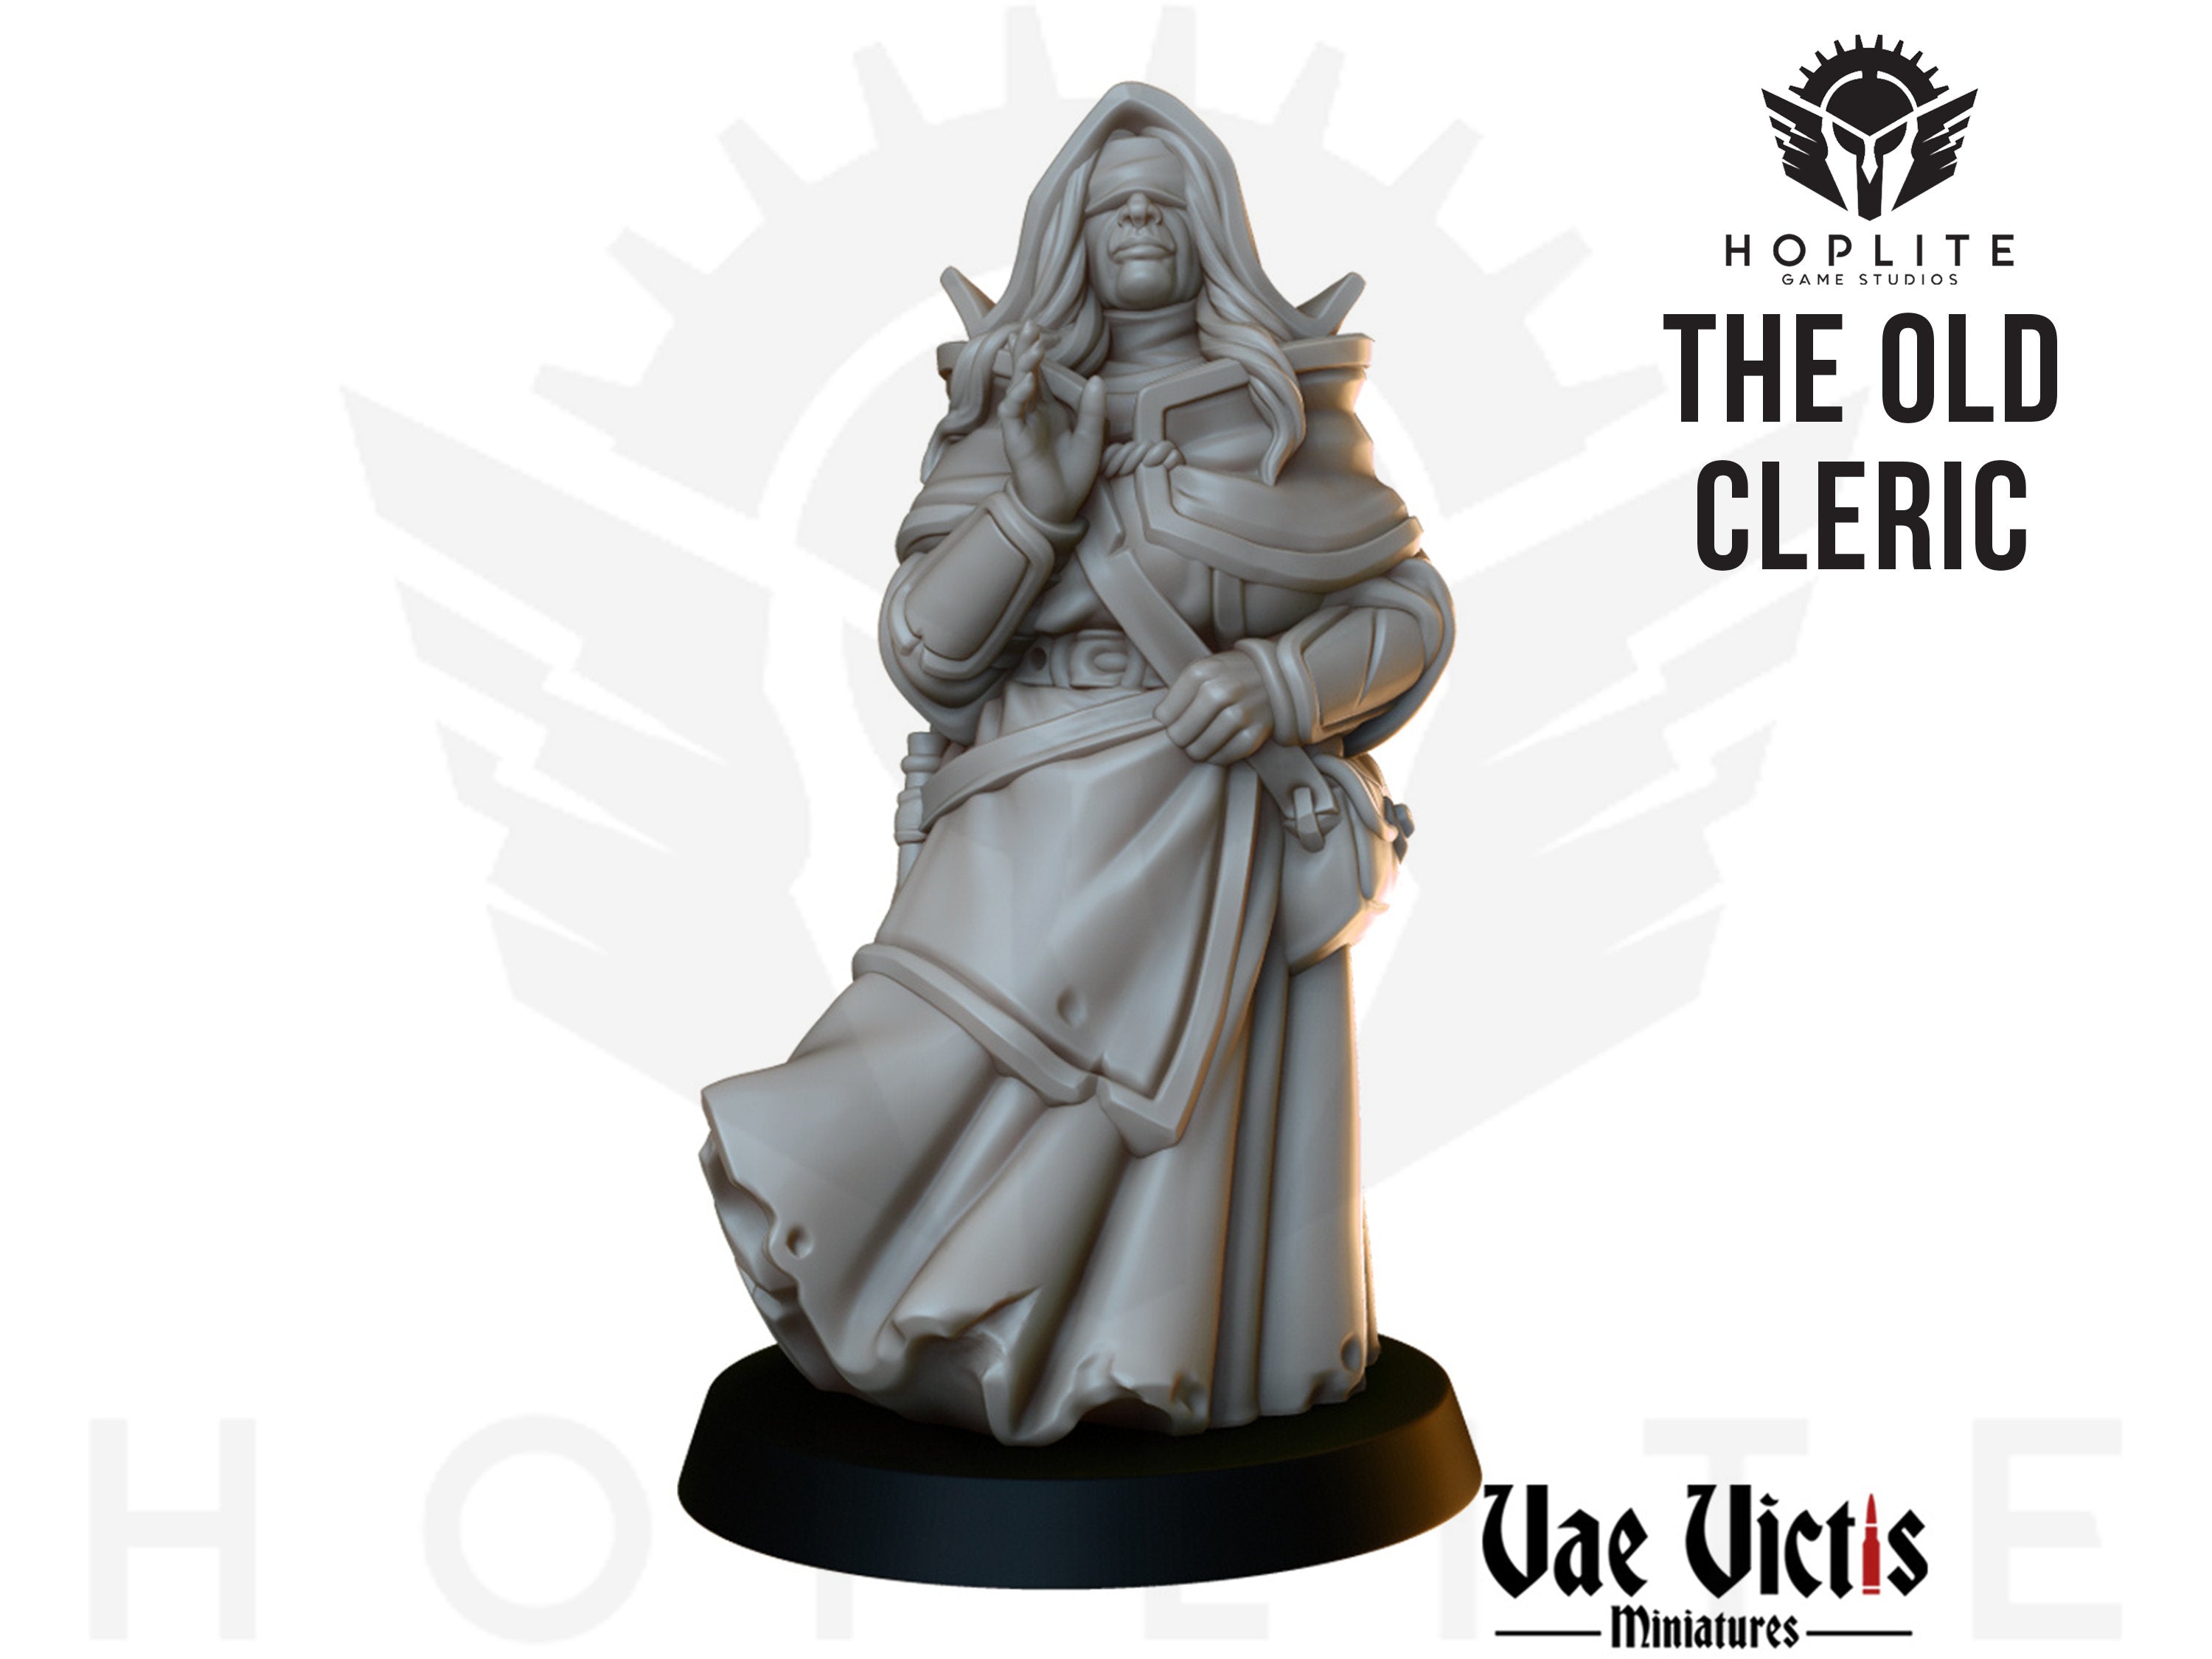 The Old Cleric